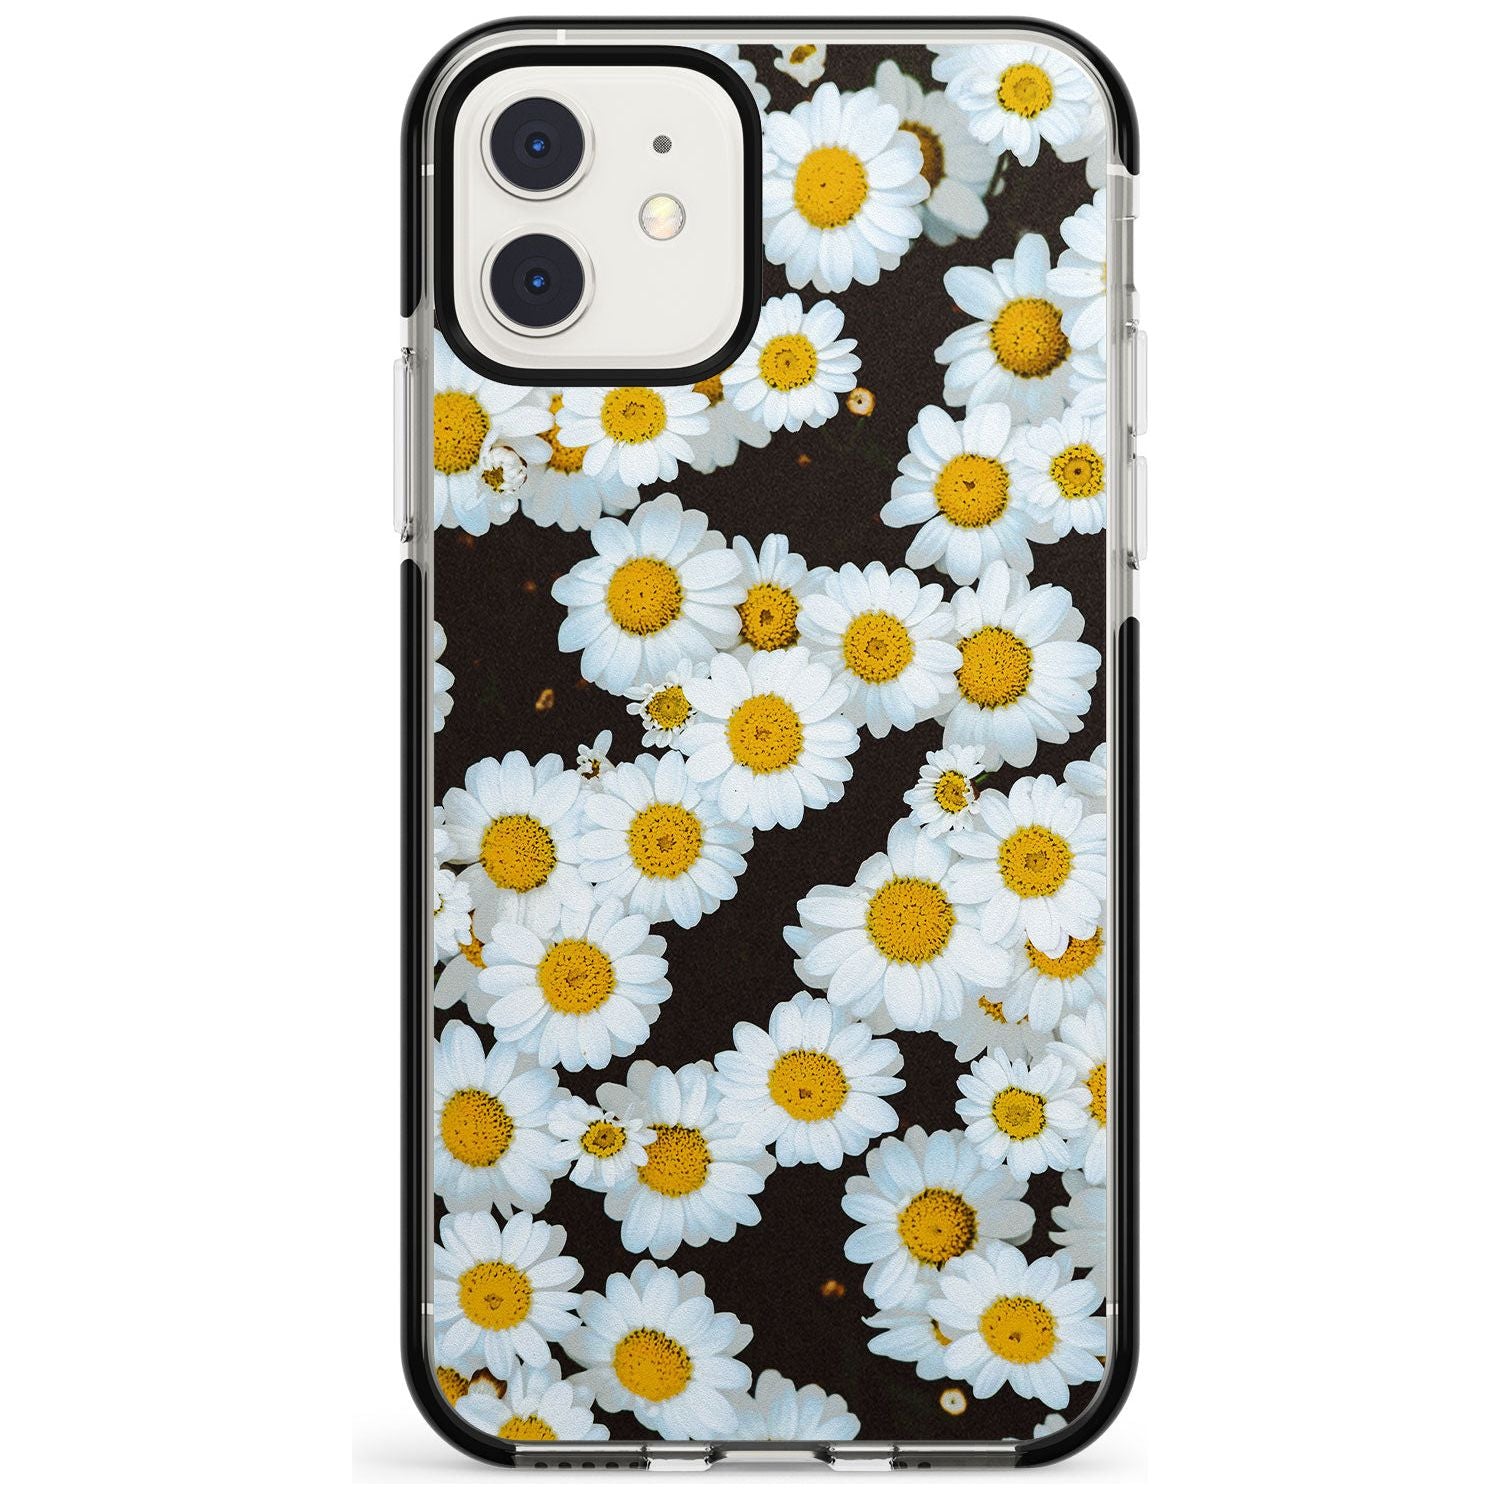 Daisies - Real Floral Photographs iPhone Case  Black Impact Phone Case - Case Warehouse